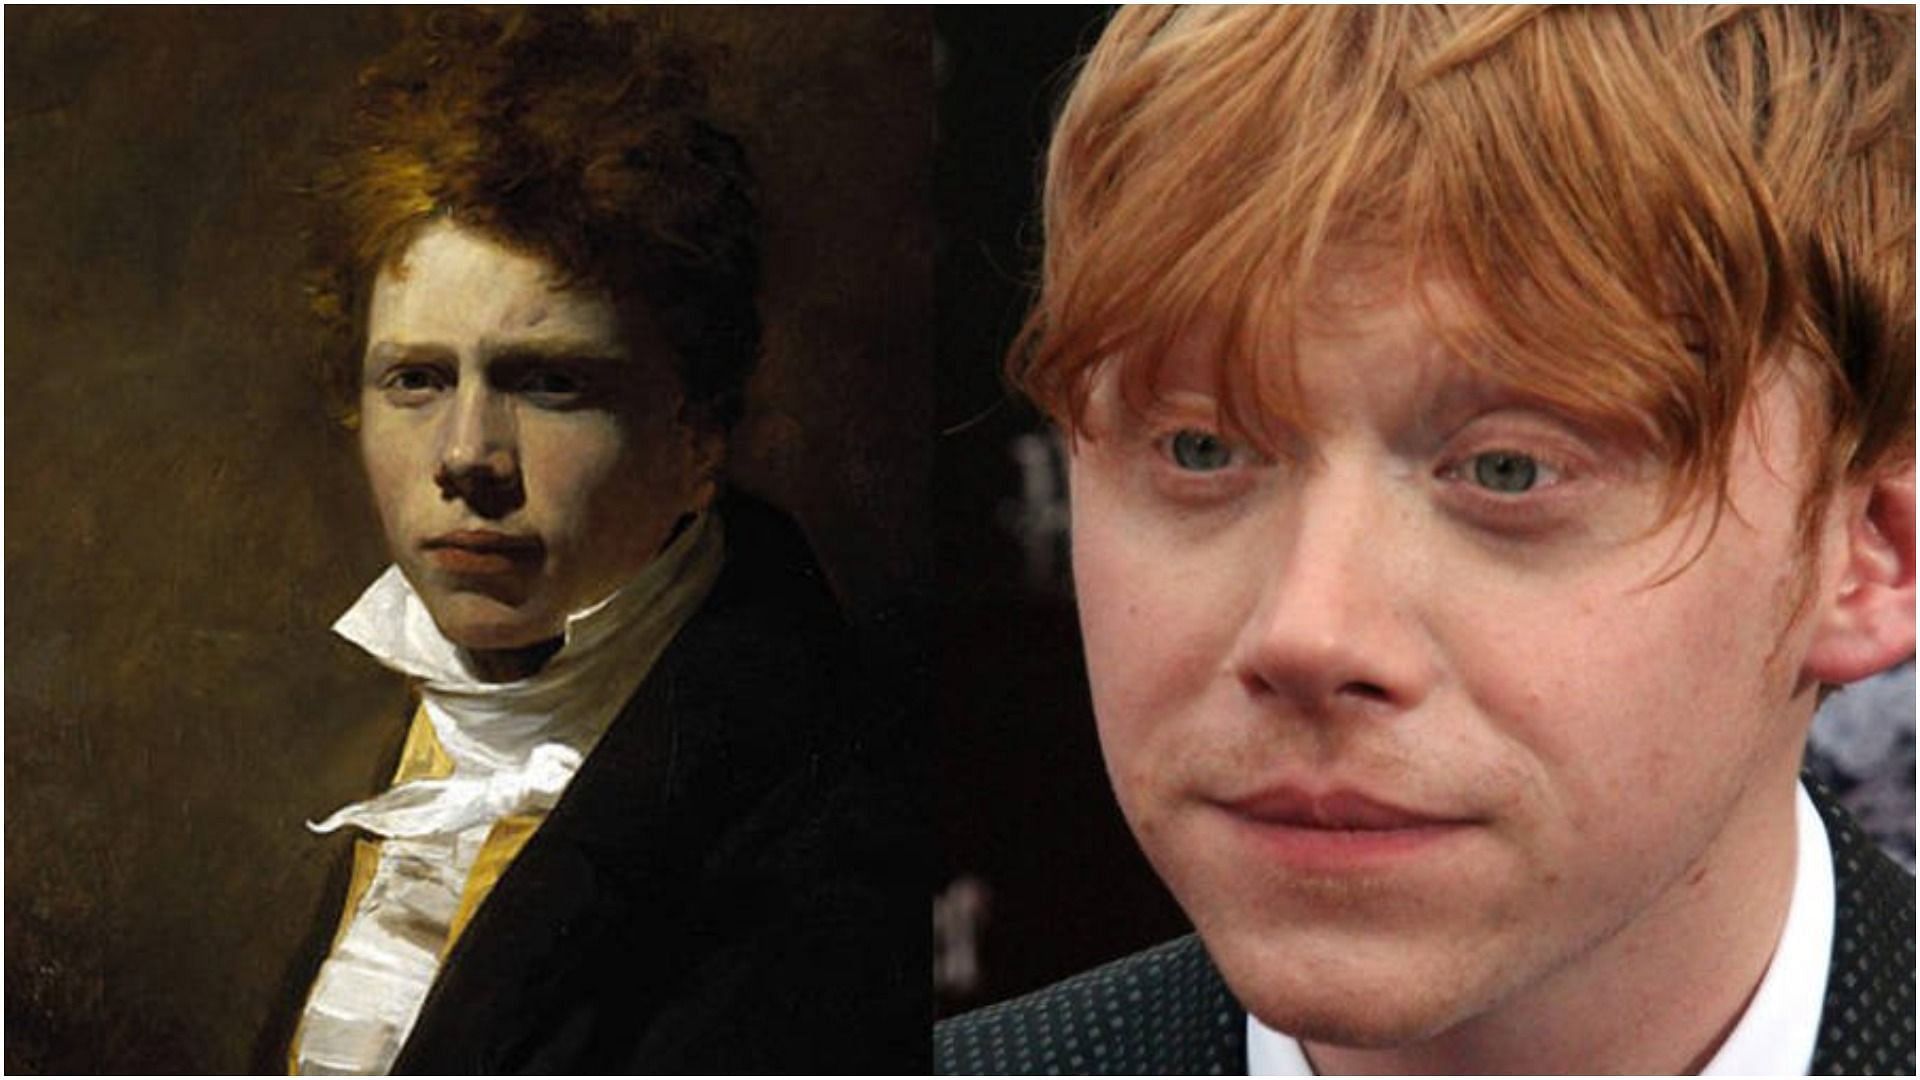 Rupert Grint and his lookalike (Images via Wikimedia Commons)